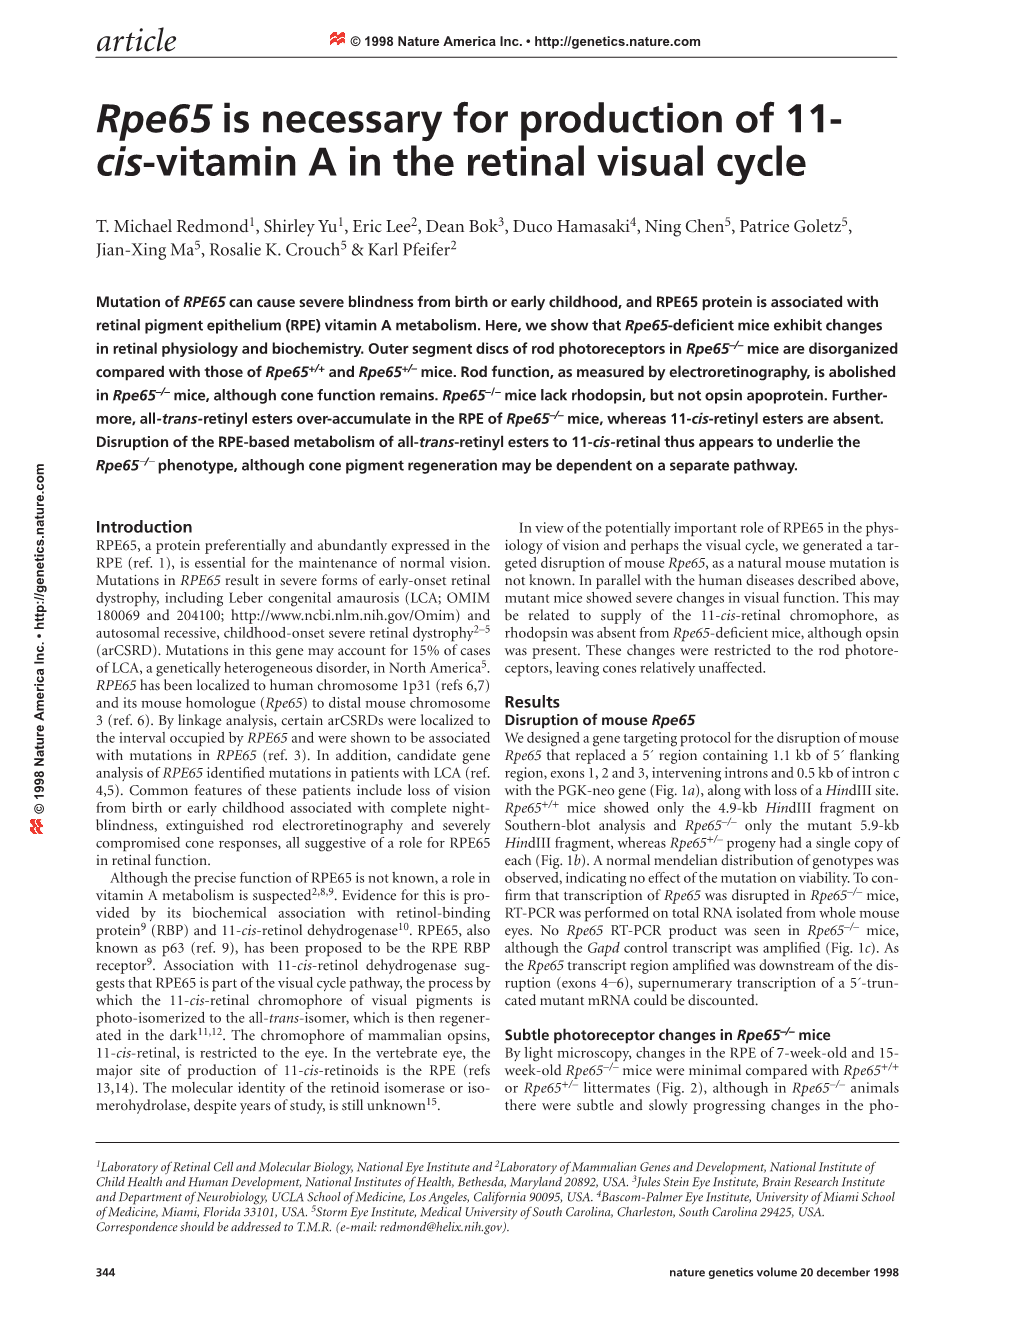 Rpe65 Is Necessary for Production of 11- Cis-Vitamin a in the Retinal Visual Cycle